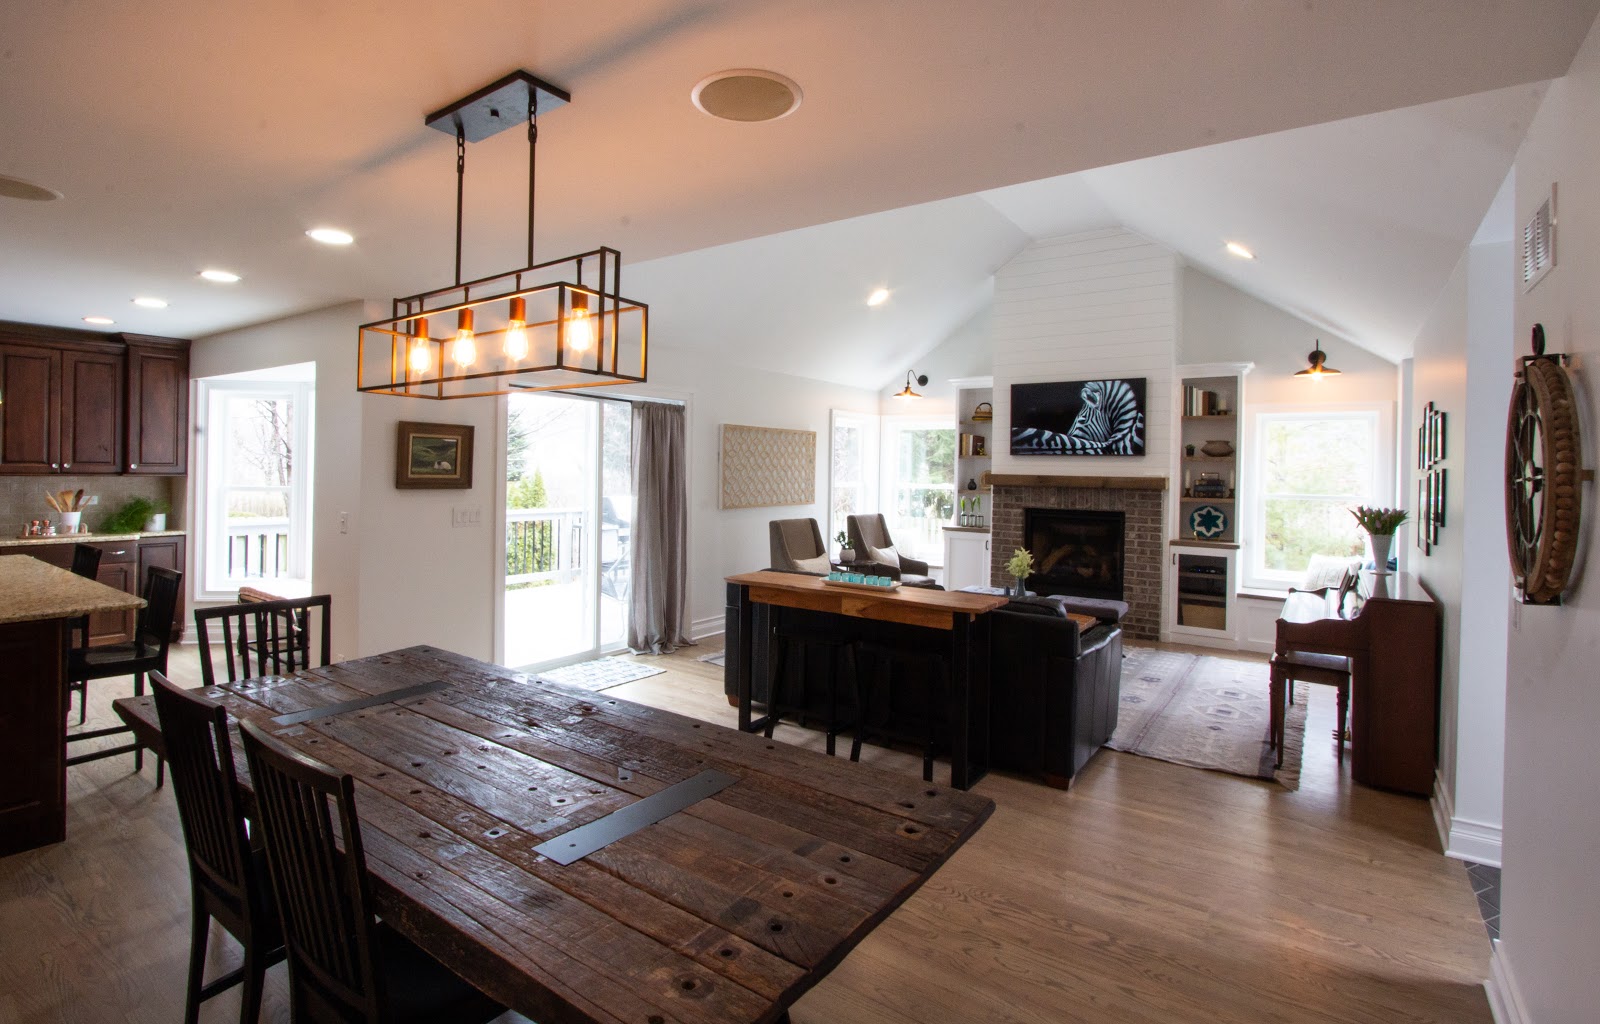 Open floor plan interior with kitchen, large farm dining table and family room